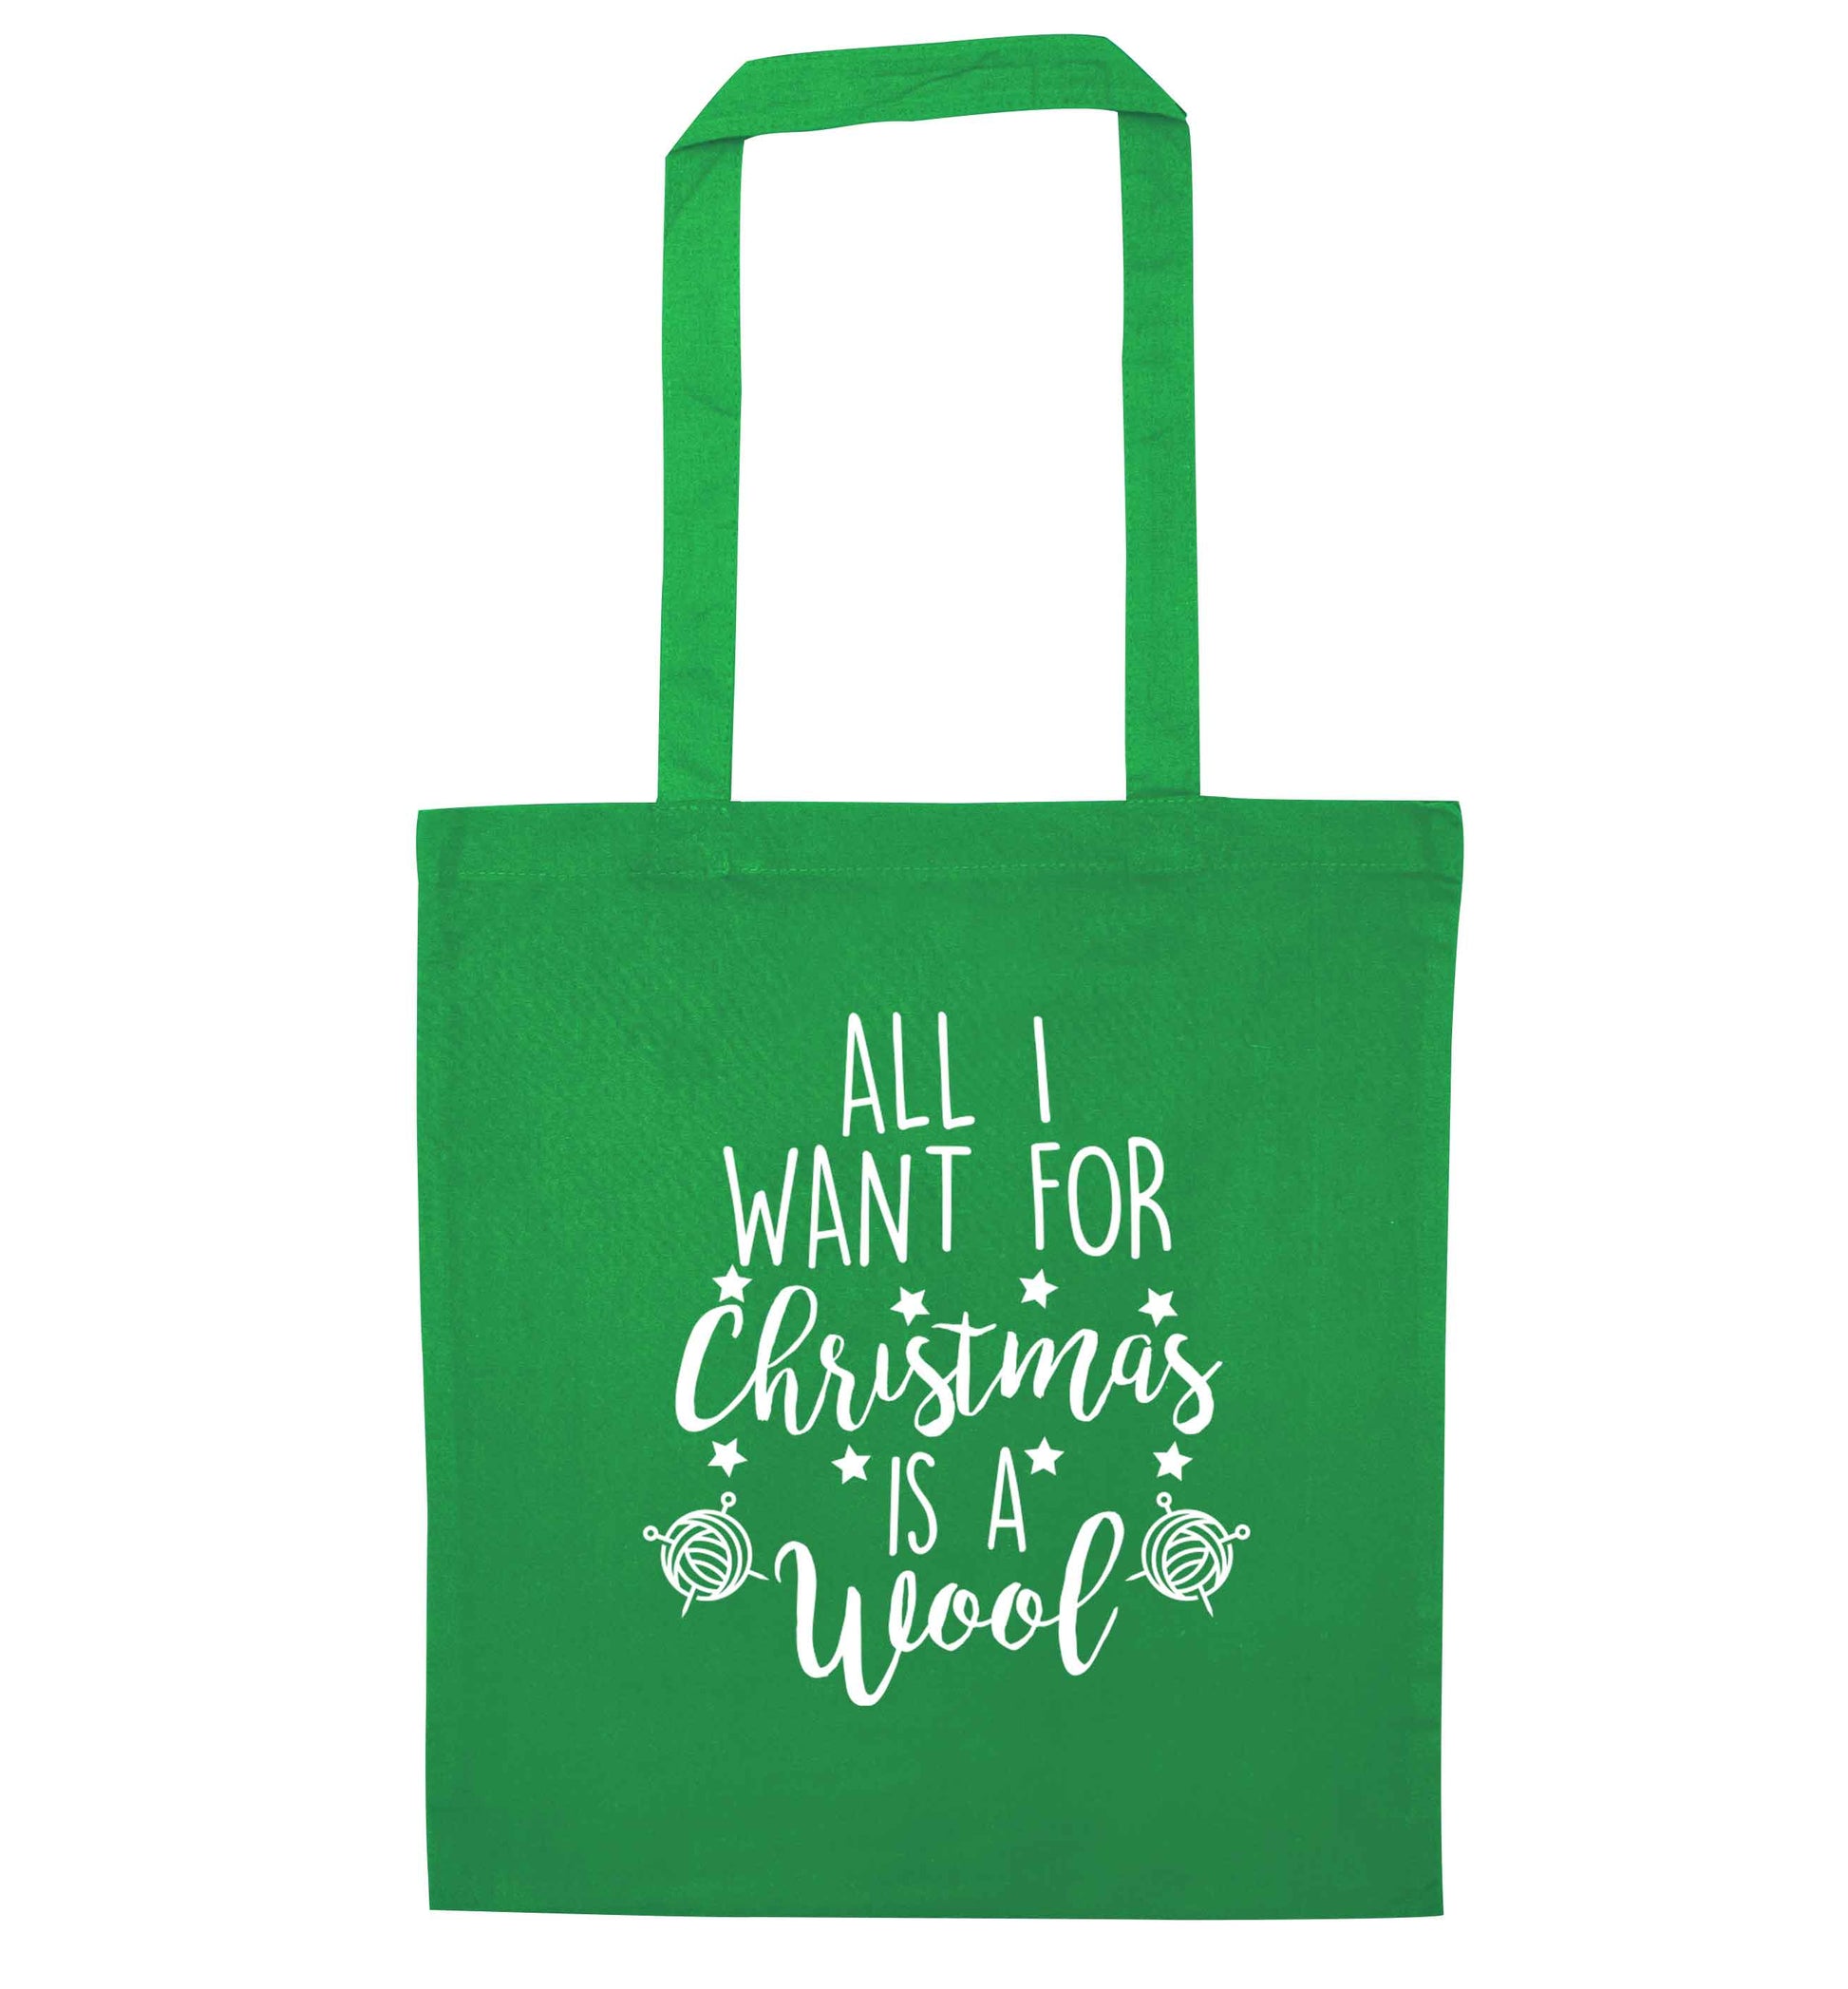 All I want for Christmas is wool! green tote bag